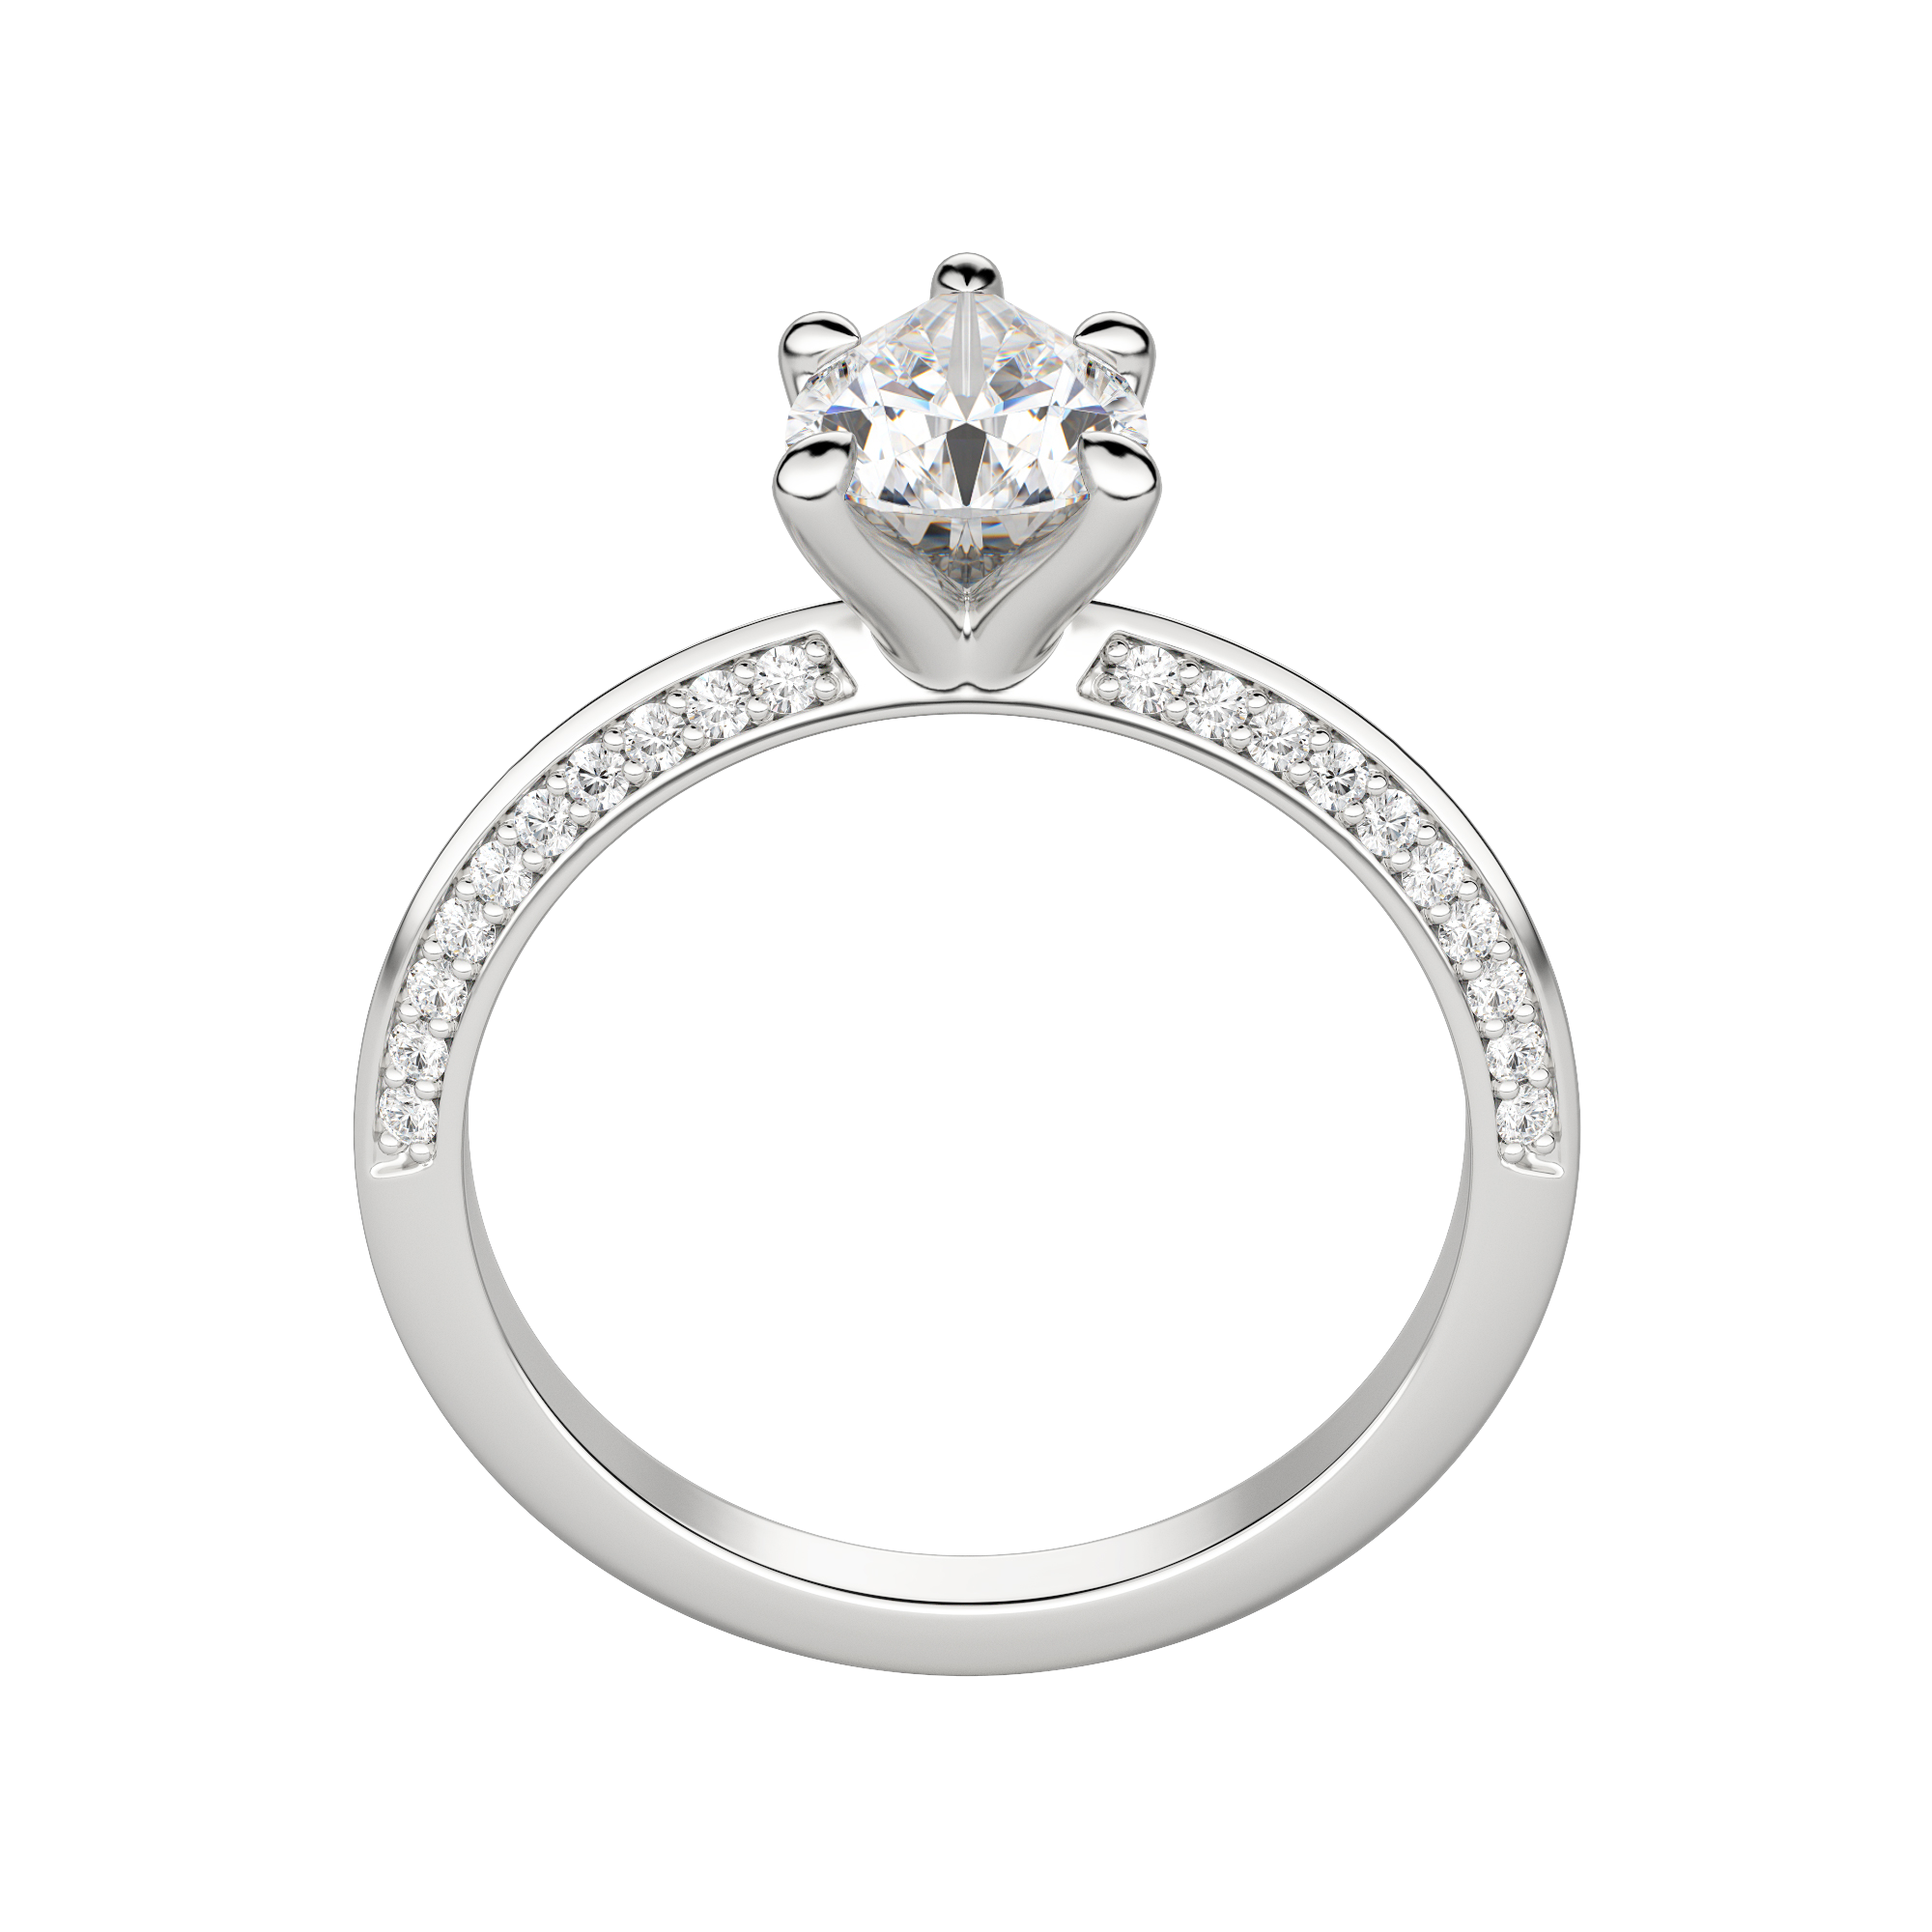 Evia Pear Cut Engagement Ring, Hover, 18K White Gold, Platinum, 